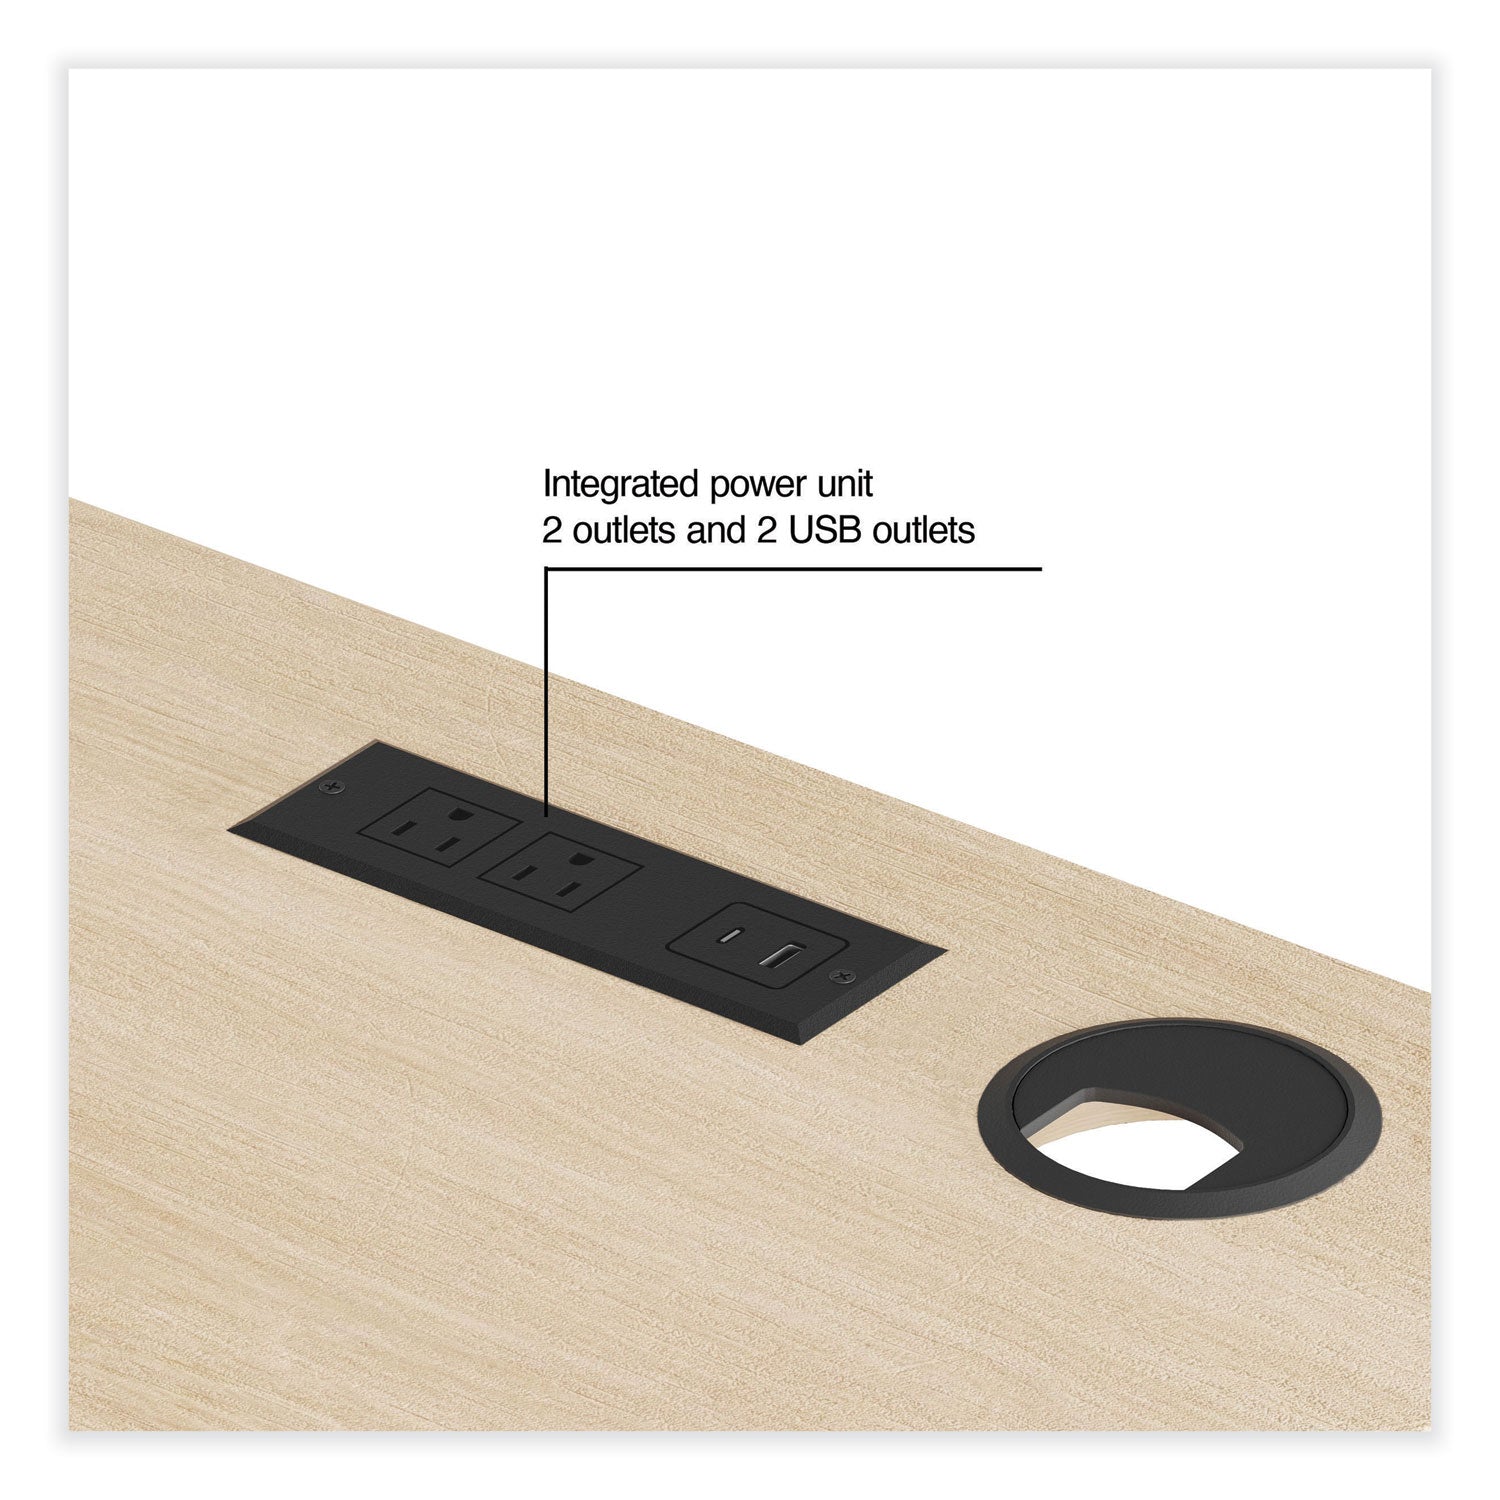 essentials-single-pedestal-l-shaped-desk-with-integrated-power-management-598-x-598-x-297-natural-wood-black_uos60420cc - 4